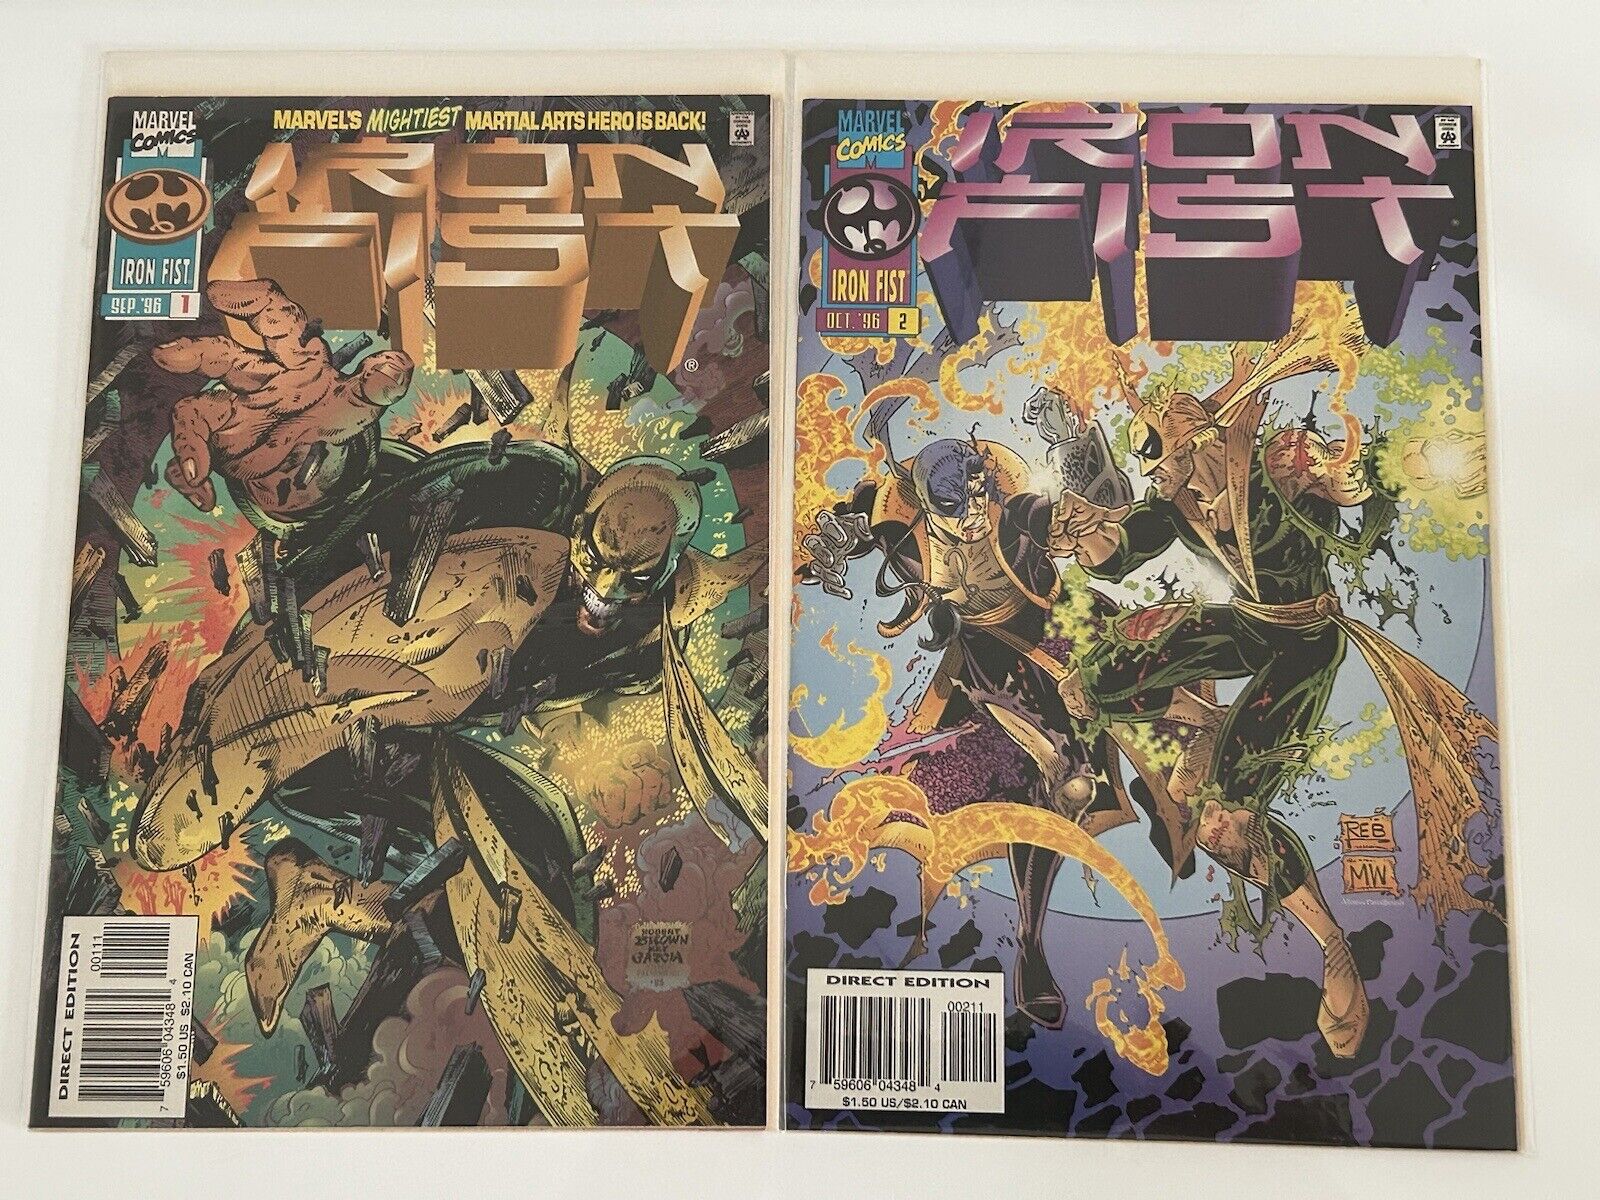 Iron Fist  #1 and #2 Vol.2 (MARVEL 1996) Daniel Rand, Colleen Wing, Misty Knight